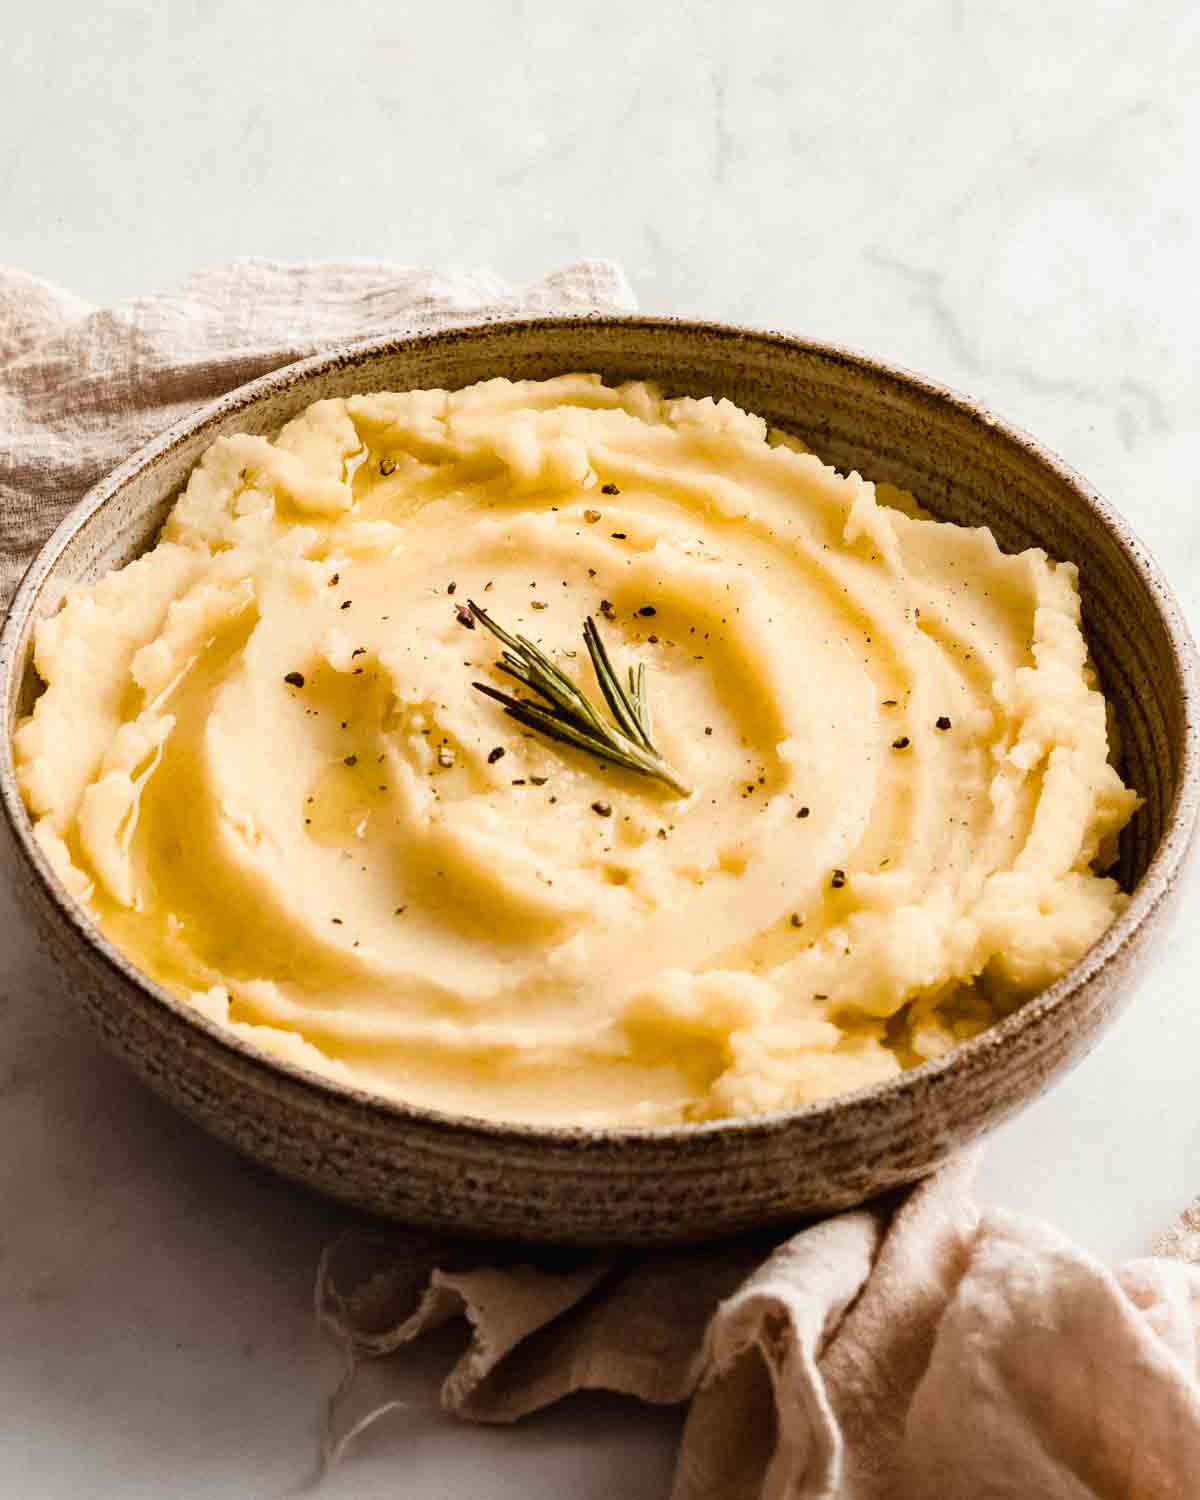 mashed potatoes in a bowl topped with fresh rosemary and black pepper.